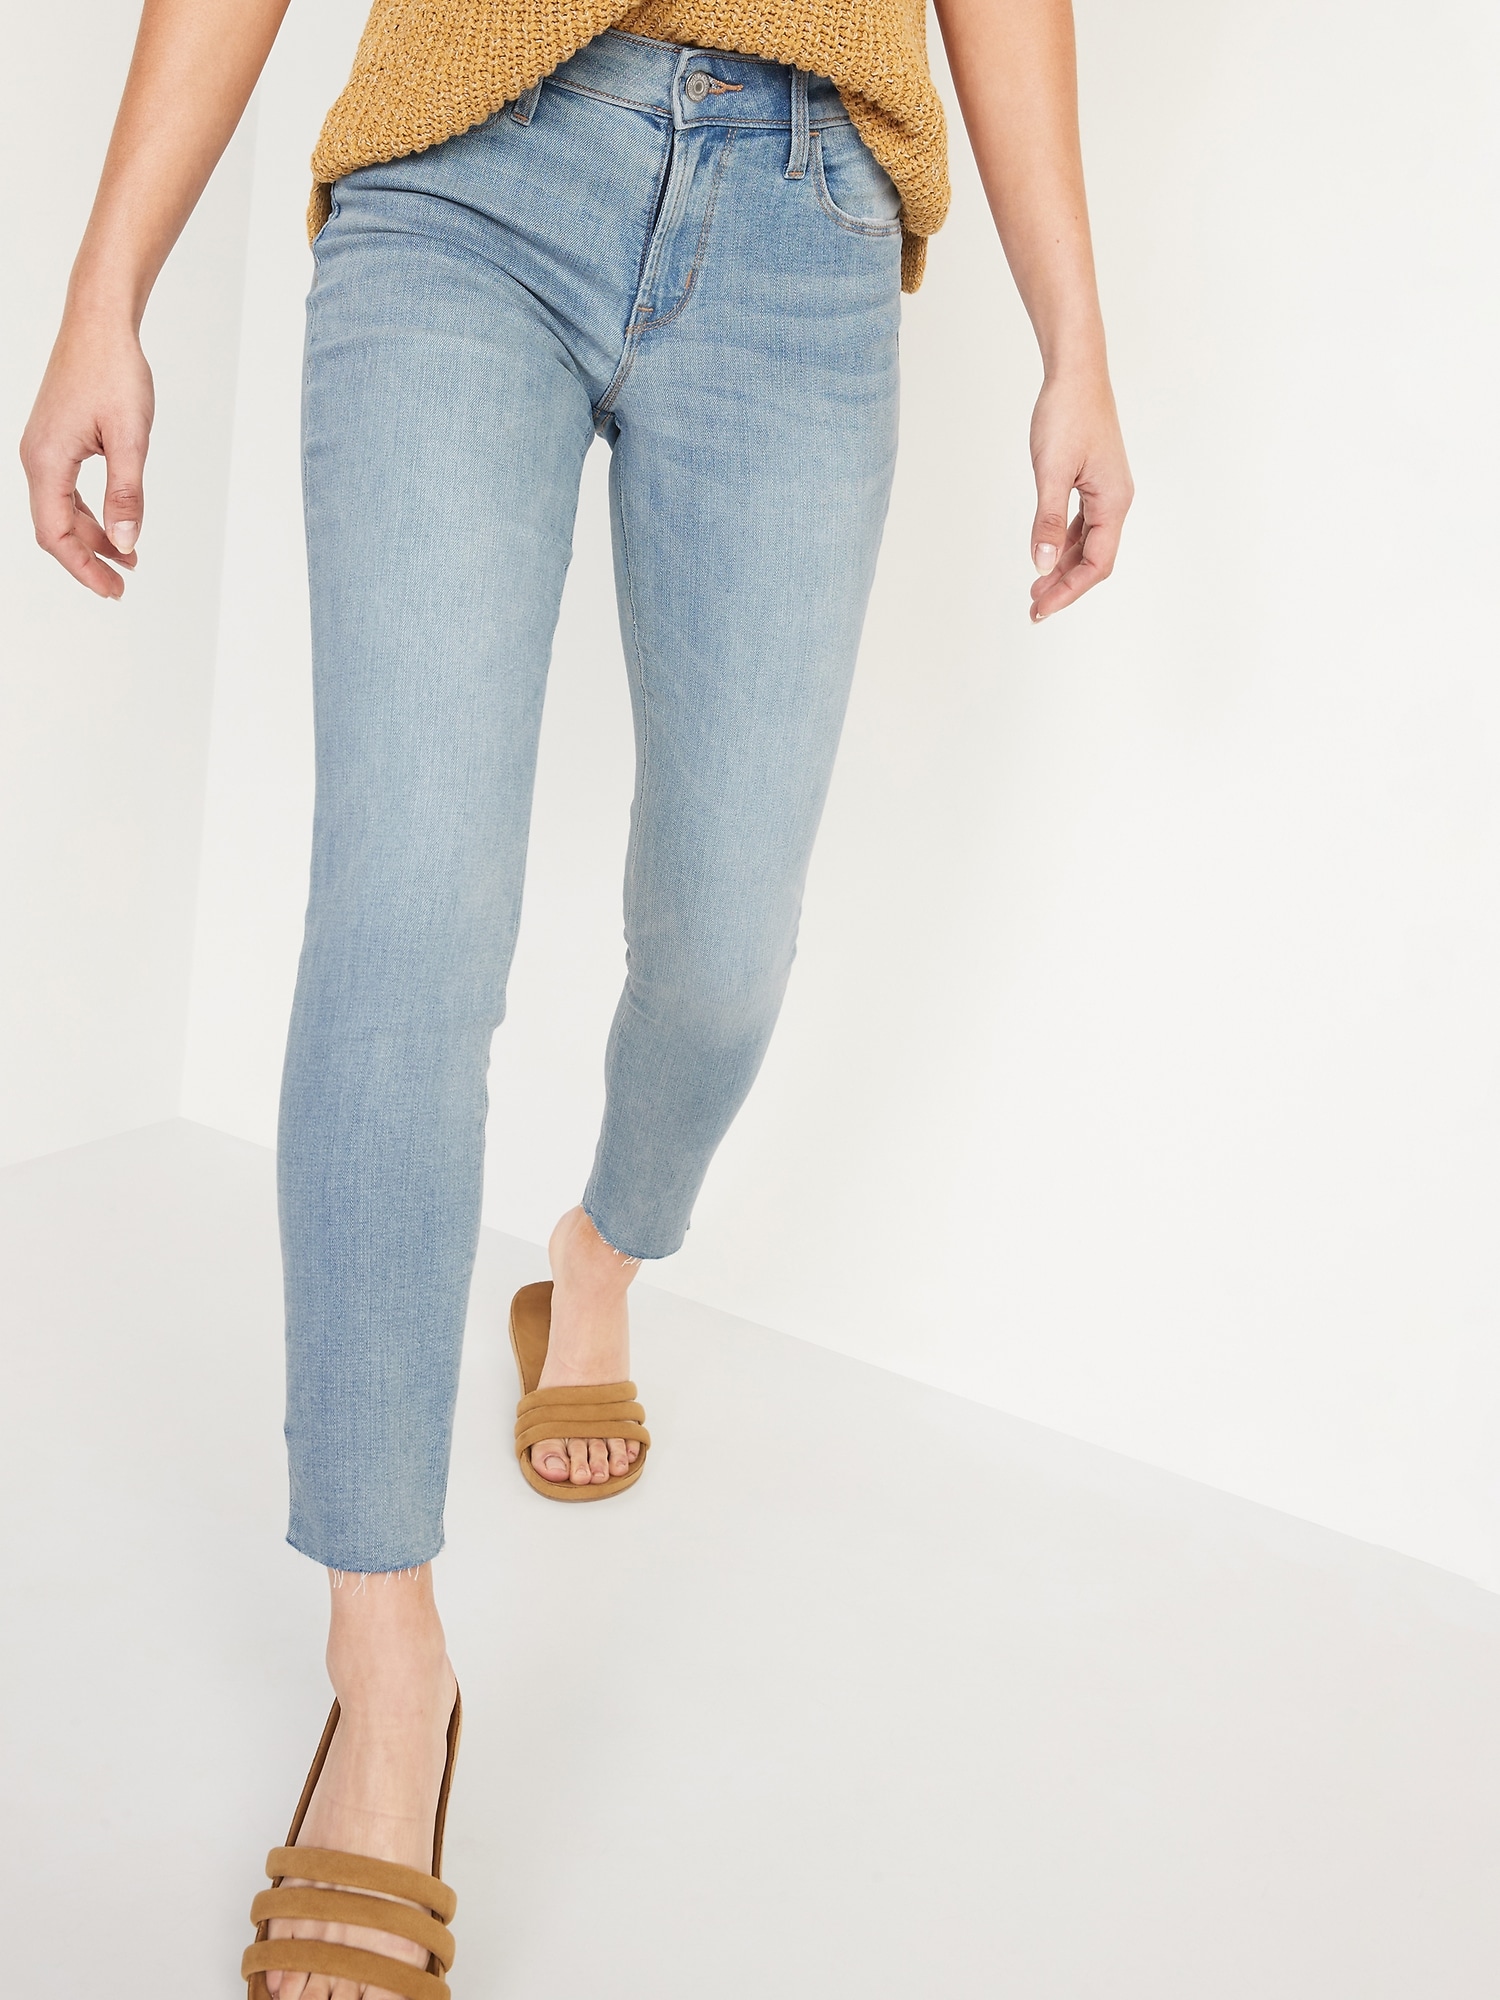 Buy > old navy ankle jeans > in stock